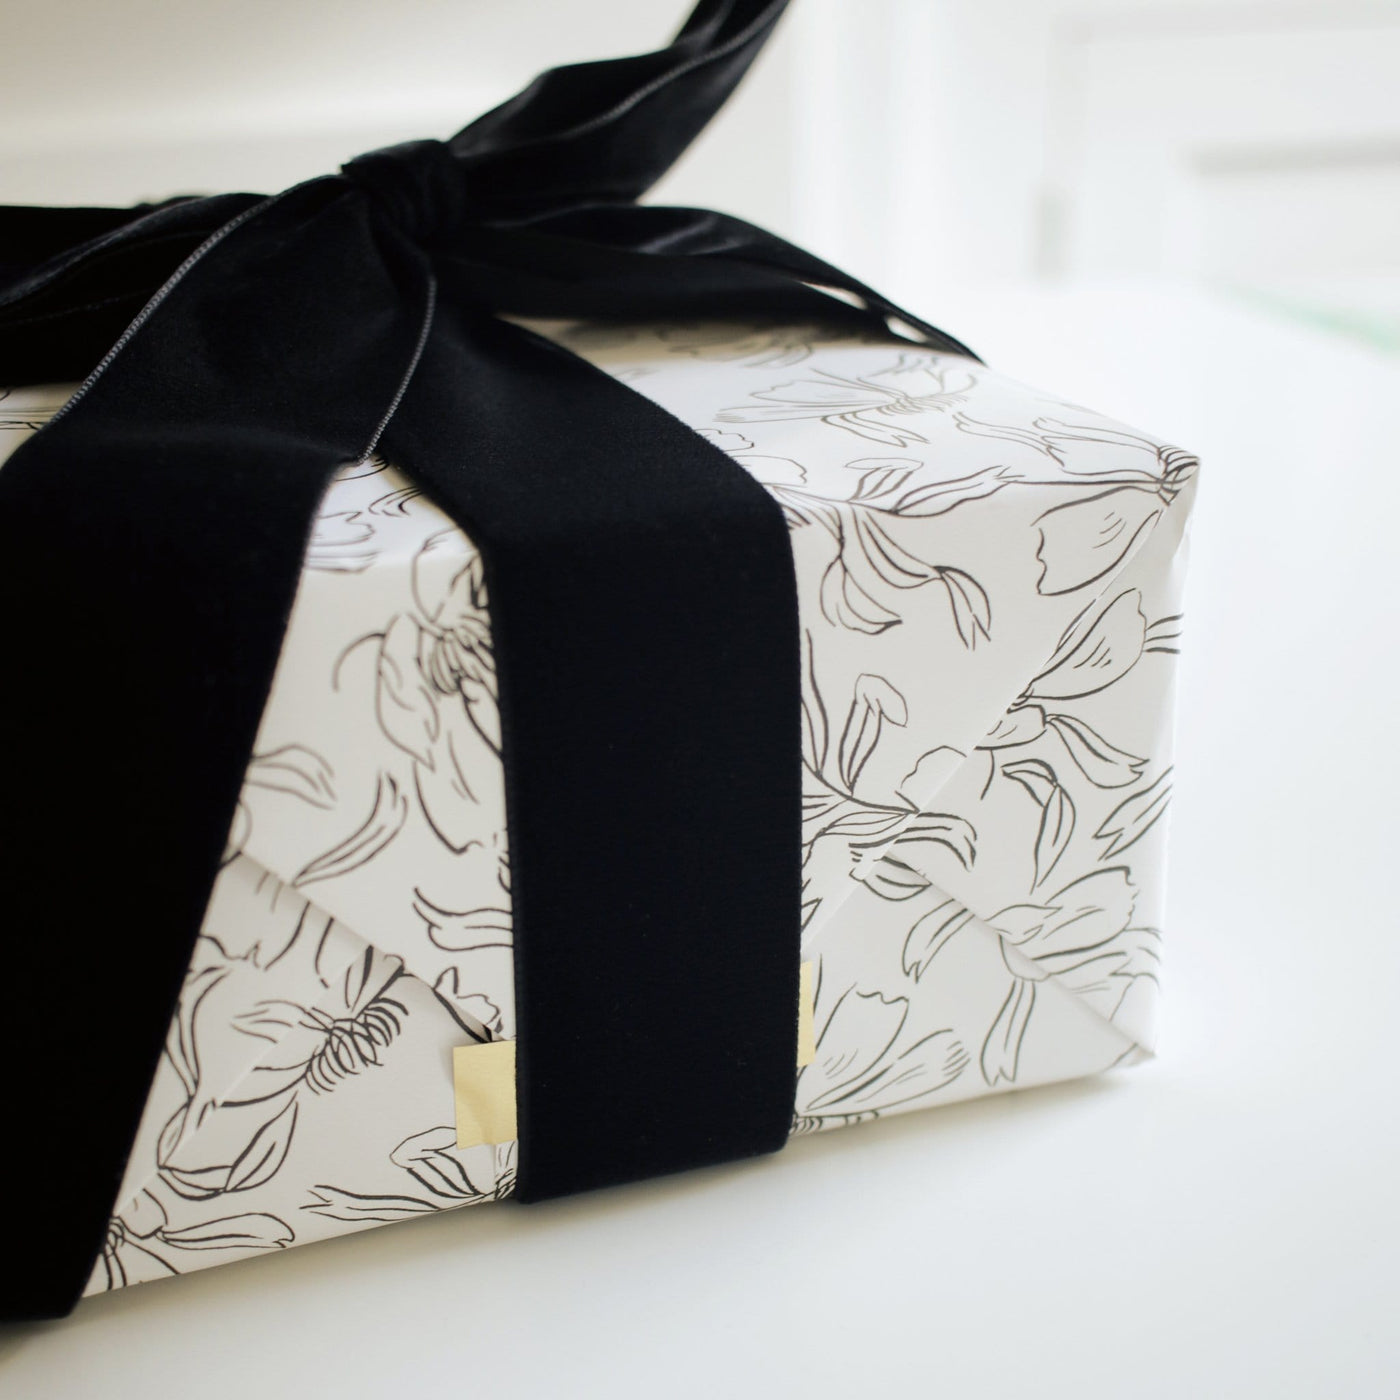 Gift Wrapped In Floral Line Art Paper With Black Velvet Bow - Annie Dornan Smith